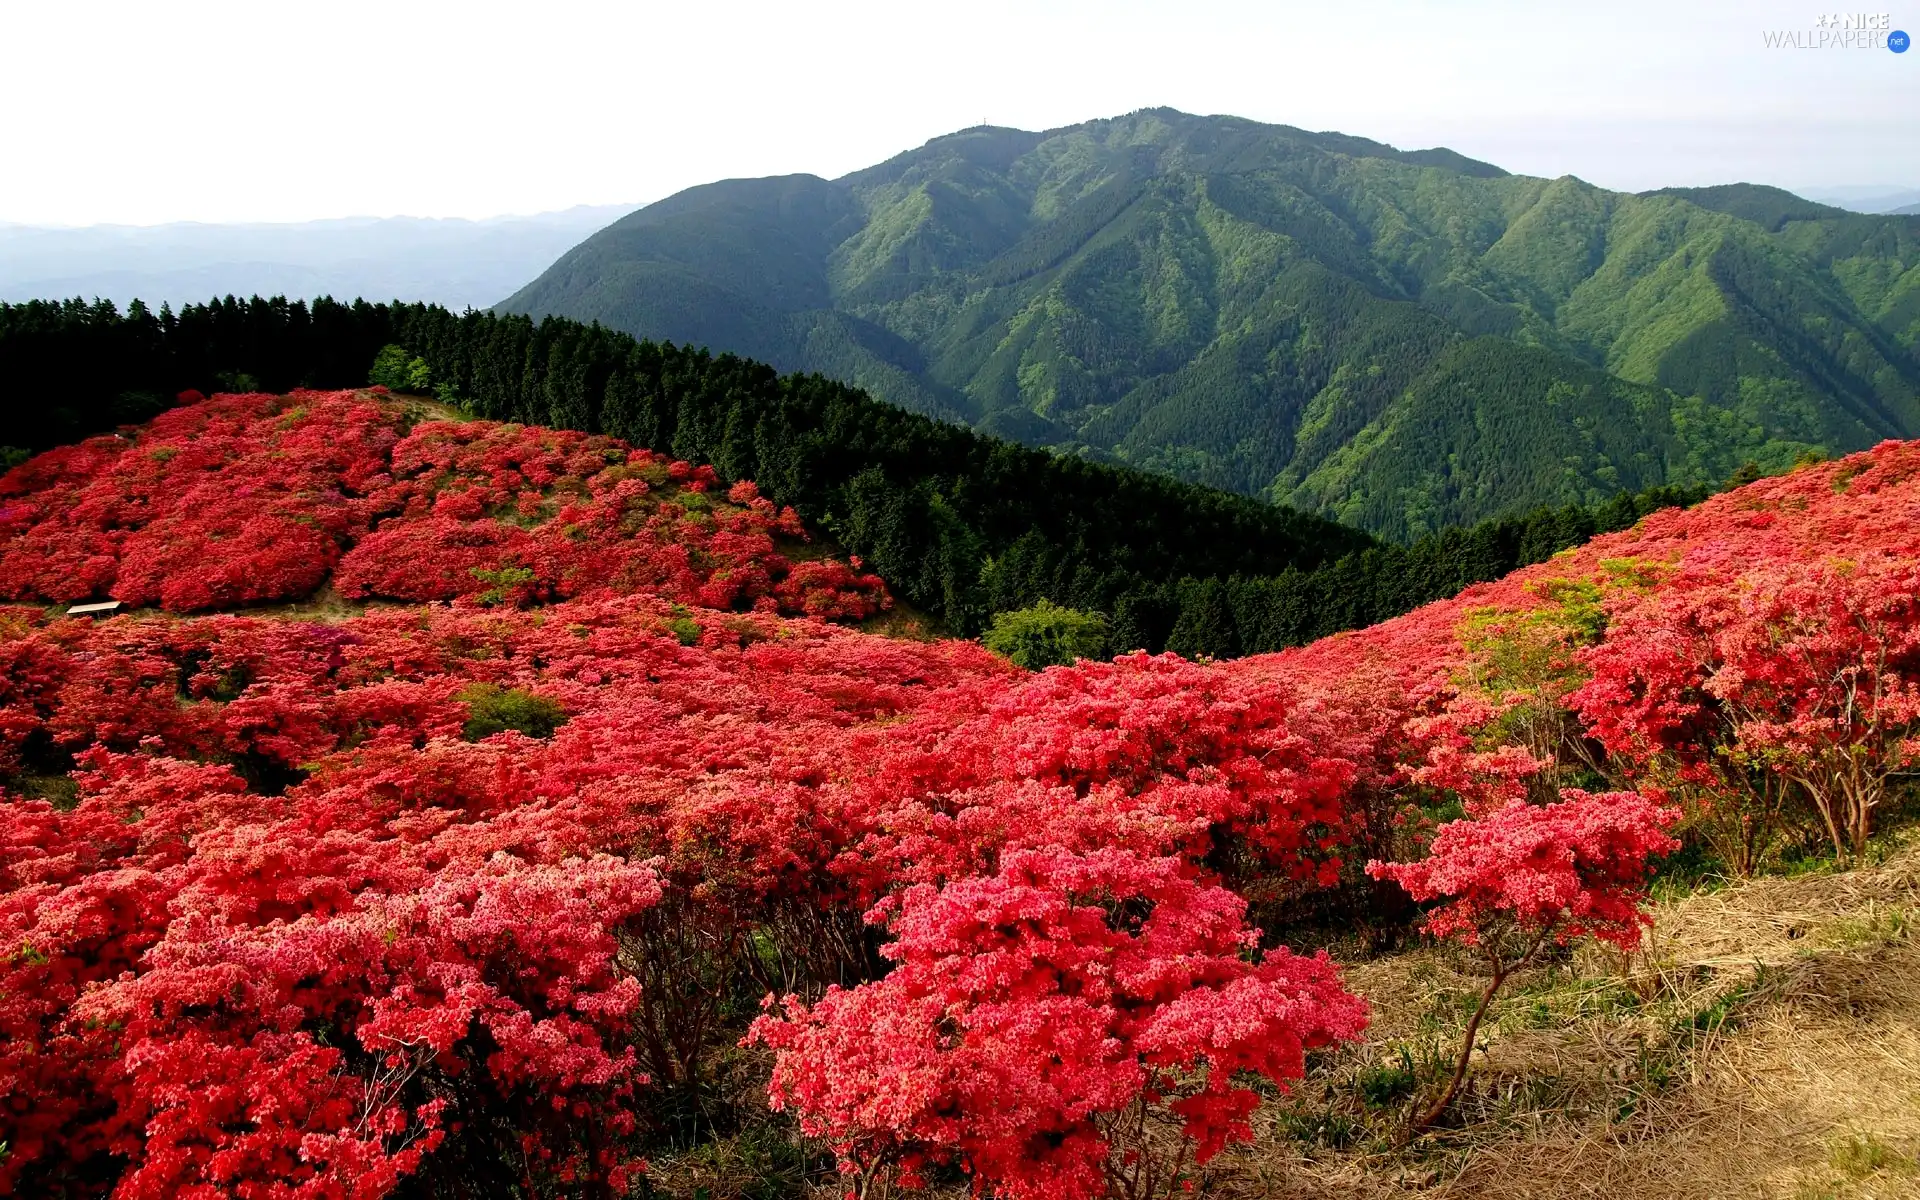 Flowers, Mountains, Meadow